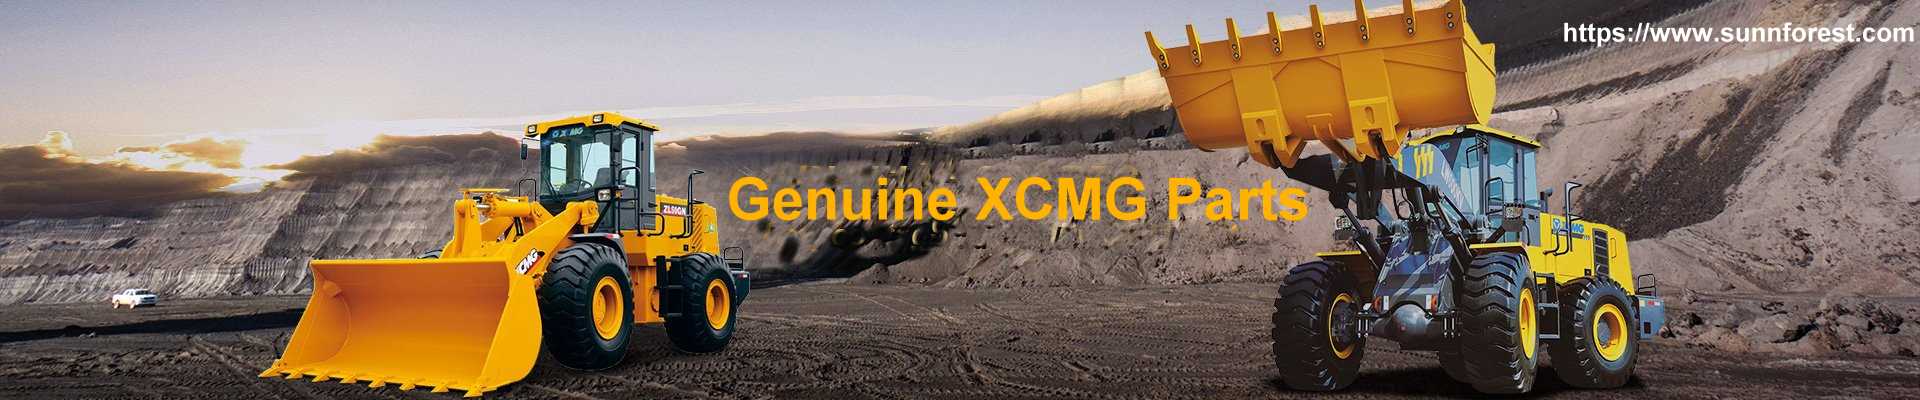 XCMG SPARE PARTS BANNER